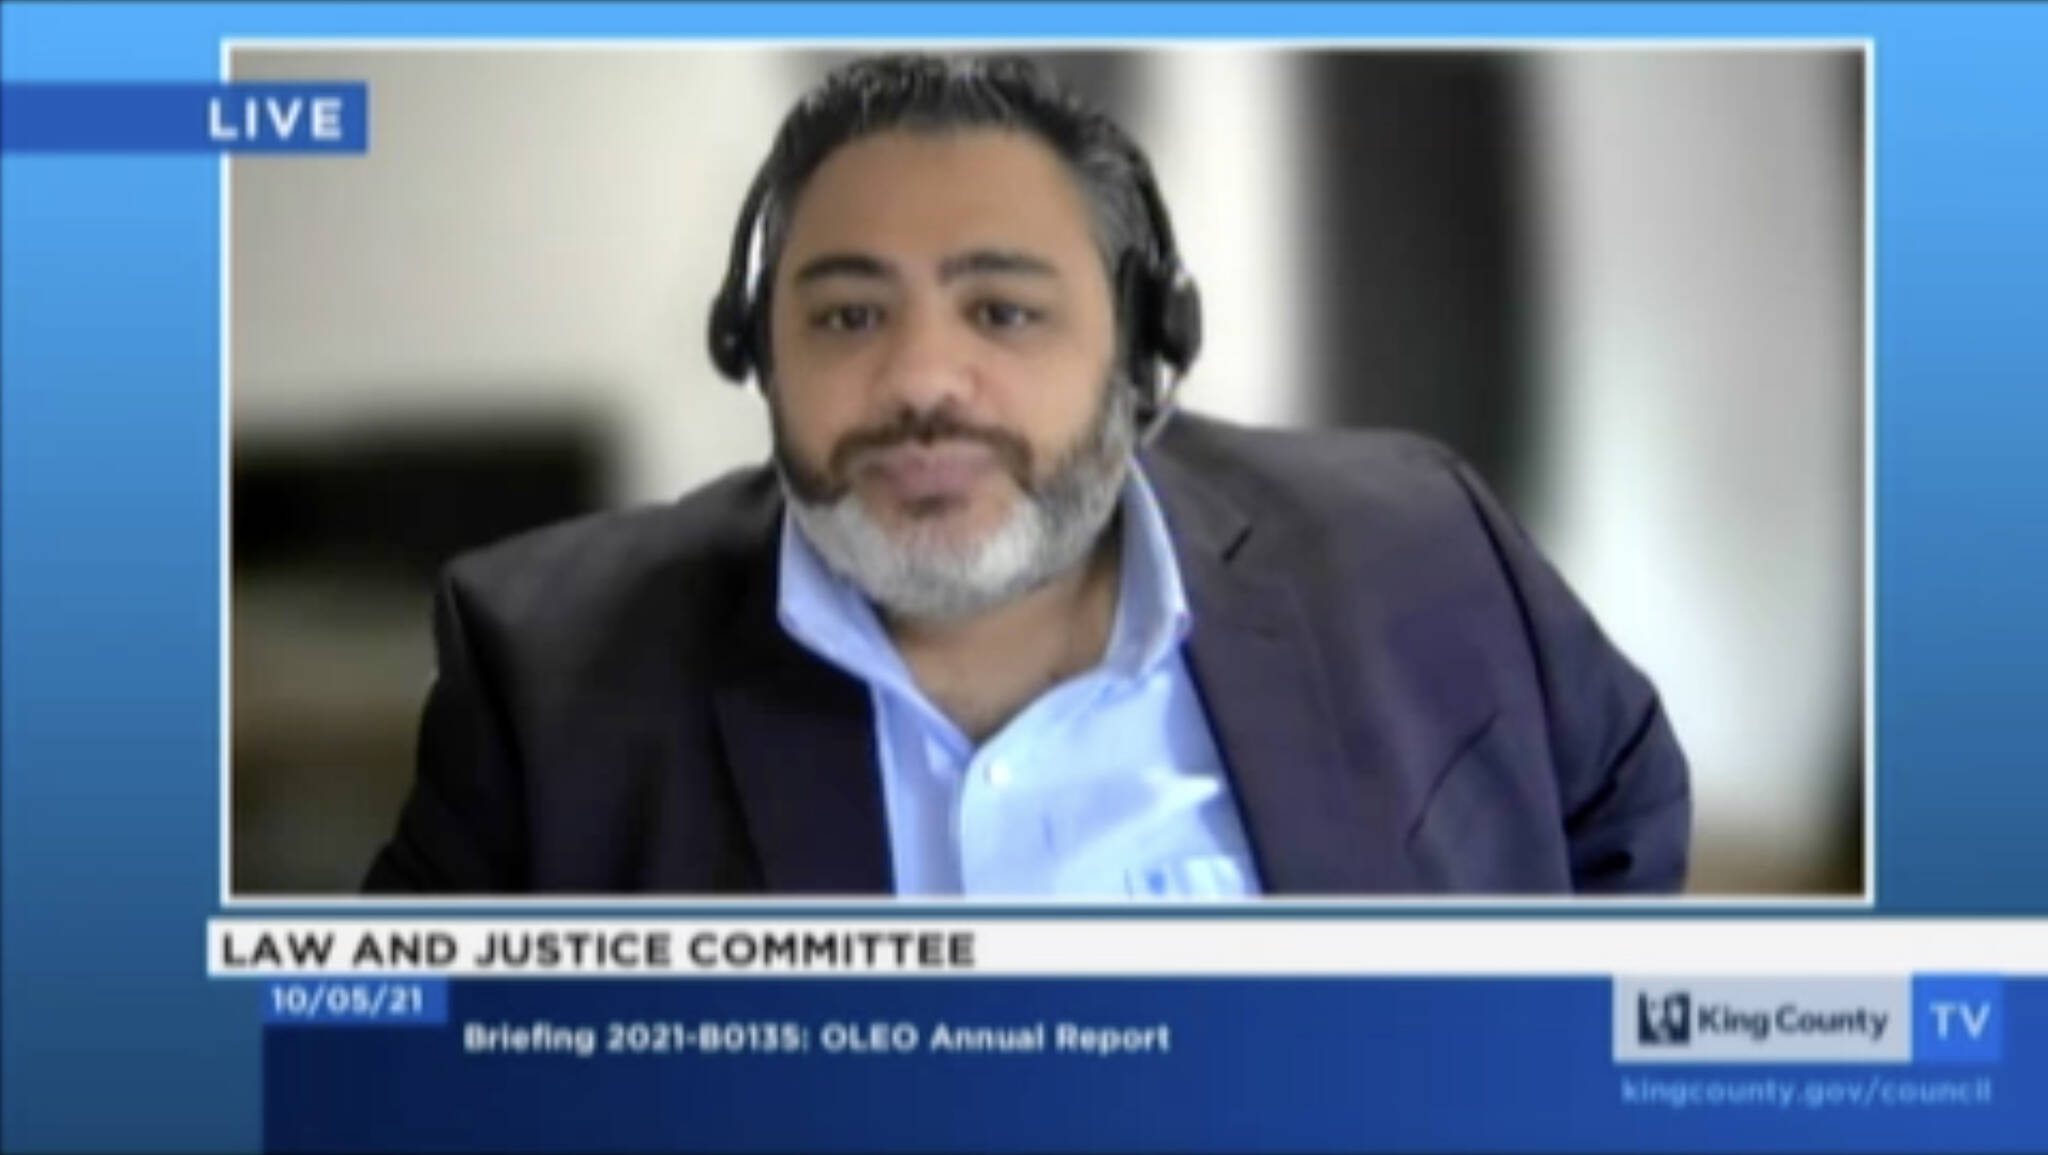 King County Office of Law Enforcement Oversight (OLEO) Director Tamer Abouzeid presents OLEO’s annual report to the King County Council Law and Justice Committee on Tuesday, Oct. 5. (Screenshot)